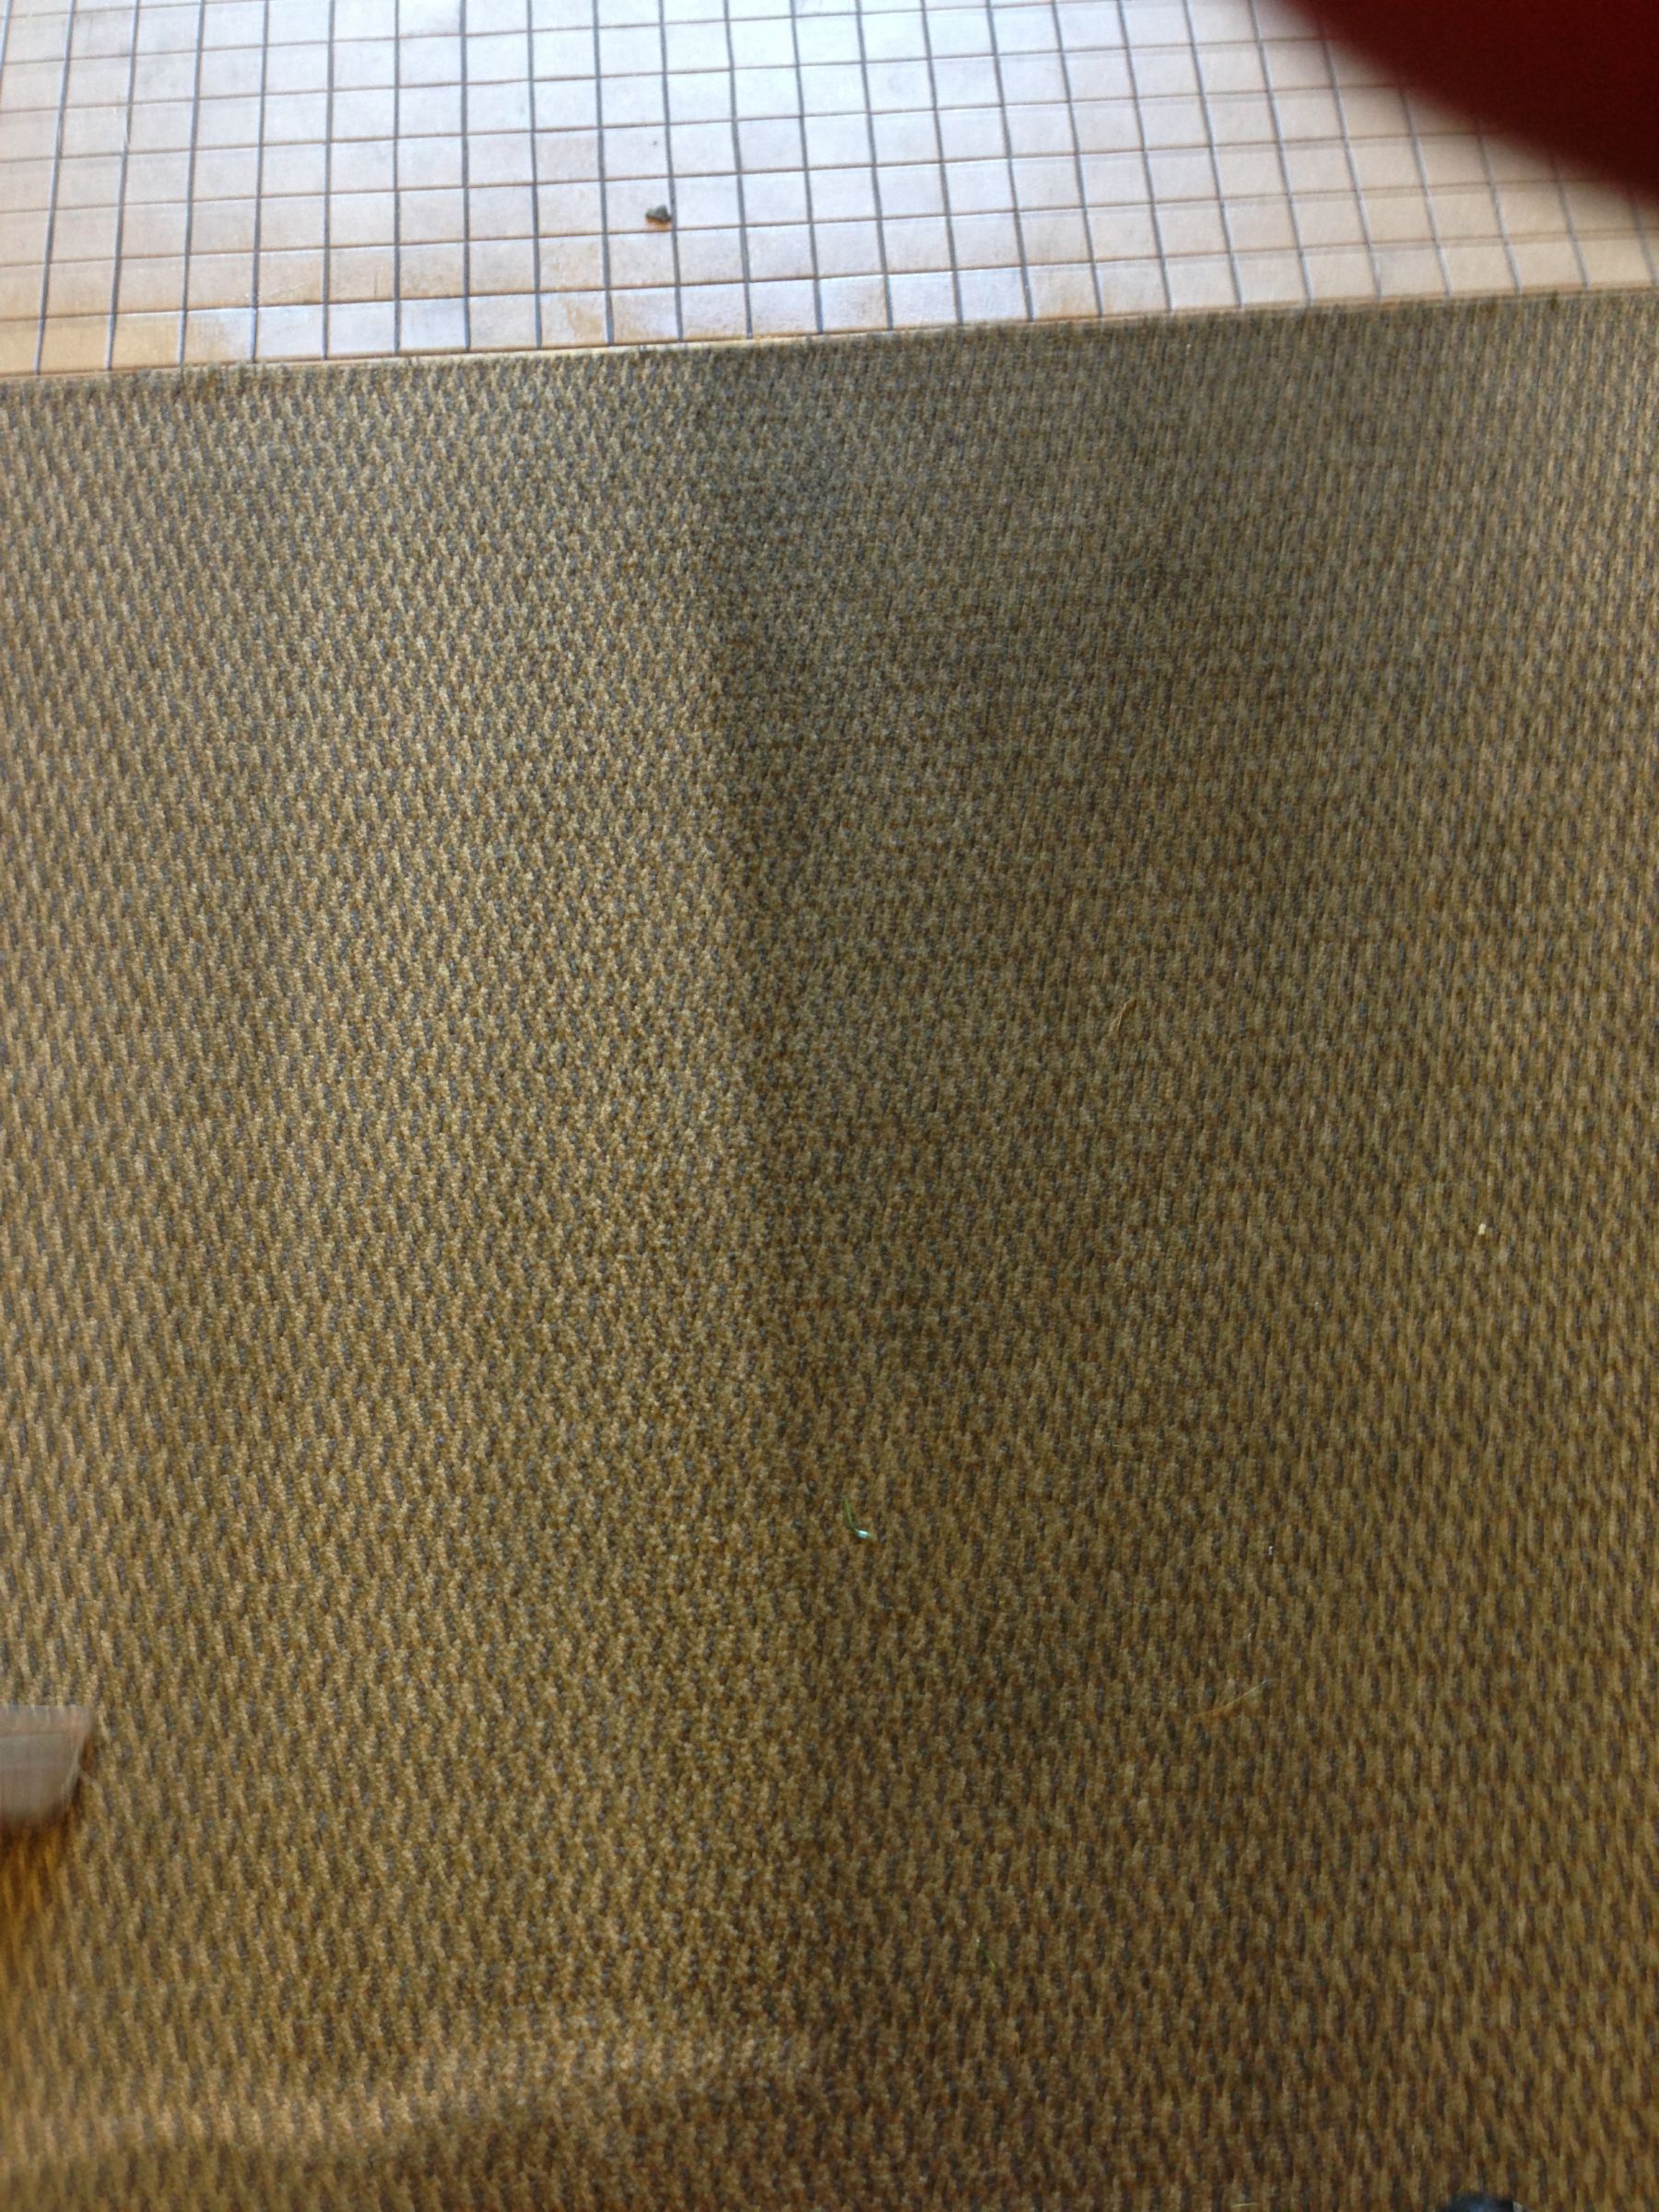 Not All Stains Are Alike. Blackwood Carpet Cleaning Experts